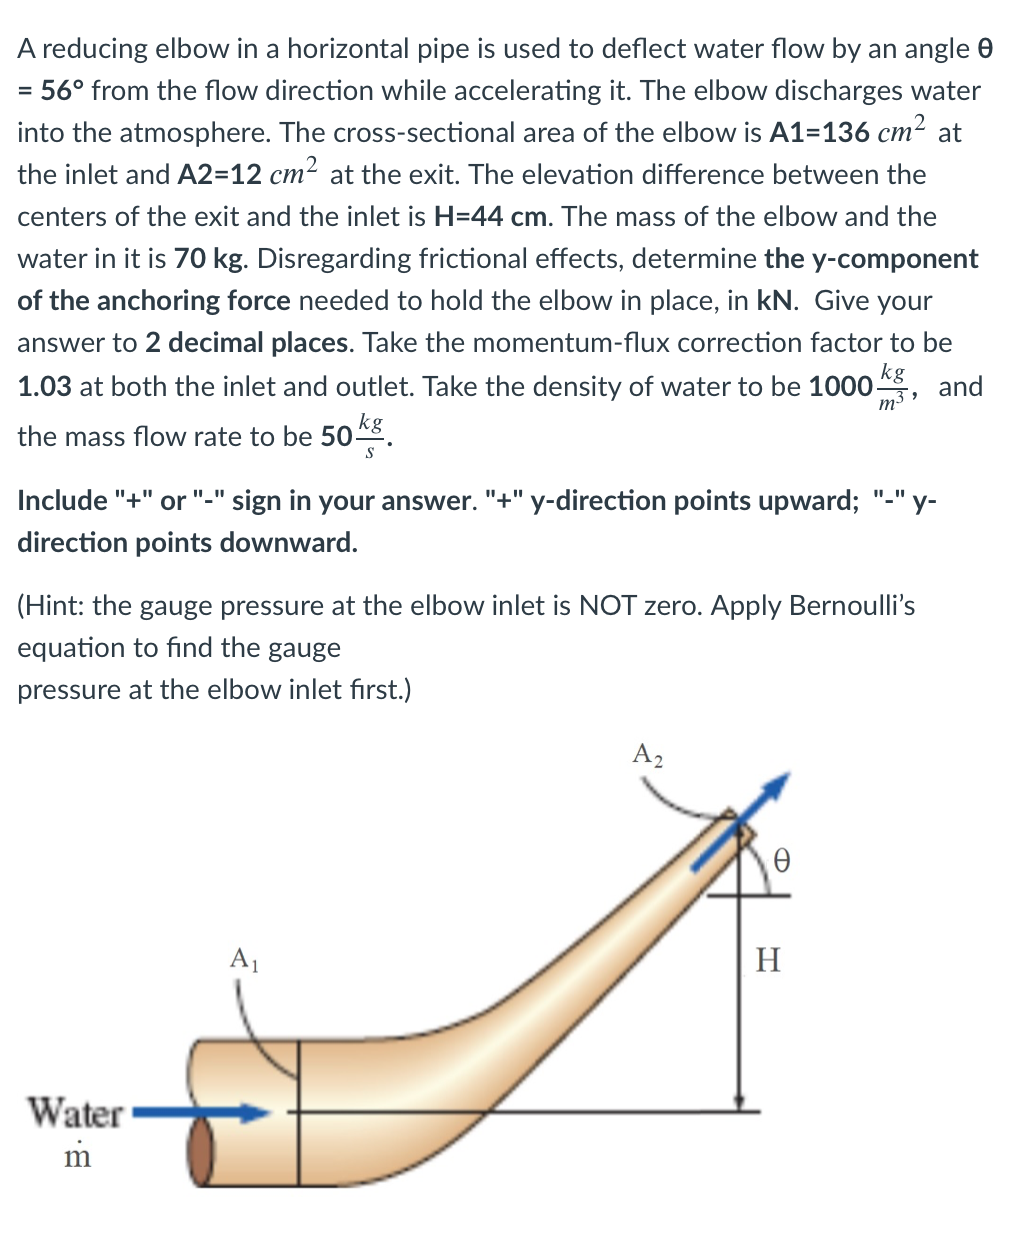 A reducing elbow in a horizontal pipe is used to deflect water flow by an angle 0
56° from the flow direction while accelerating it. The elbow discharges water
into the atmosphere. The cross-sectional area of the elbow is A1=136 cm2 at
the inlet and A2=12 cm2 at the exit. The elevation difference between the
centers of the exit and the inlet is H=44 cm. The mass of the elbow and the
water in it is 70 kg. Disregarding frictional effects, determine the y-component
of the anchoring force needed to hold the elbow in place, in kN. Give your
answer to 2 decimal places. Take the momentum-flux correction factor to be
kg
1.03 at both the inlet and outlet. Take the density of water to be 1000-
and
m3
the mass flow rate to be 50*8
Include "+"
"+" y-direction points upward; "-" y-
"_"
or
sign in your answer.
direction points downward.
(Hint: the gauge pressure at the elbow inlet is NOT zero. Apply Bernoulli's
equation to find the gauge
pressure at the elbow inlet first.)
A2
A1
H
Water
m
